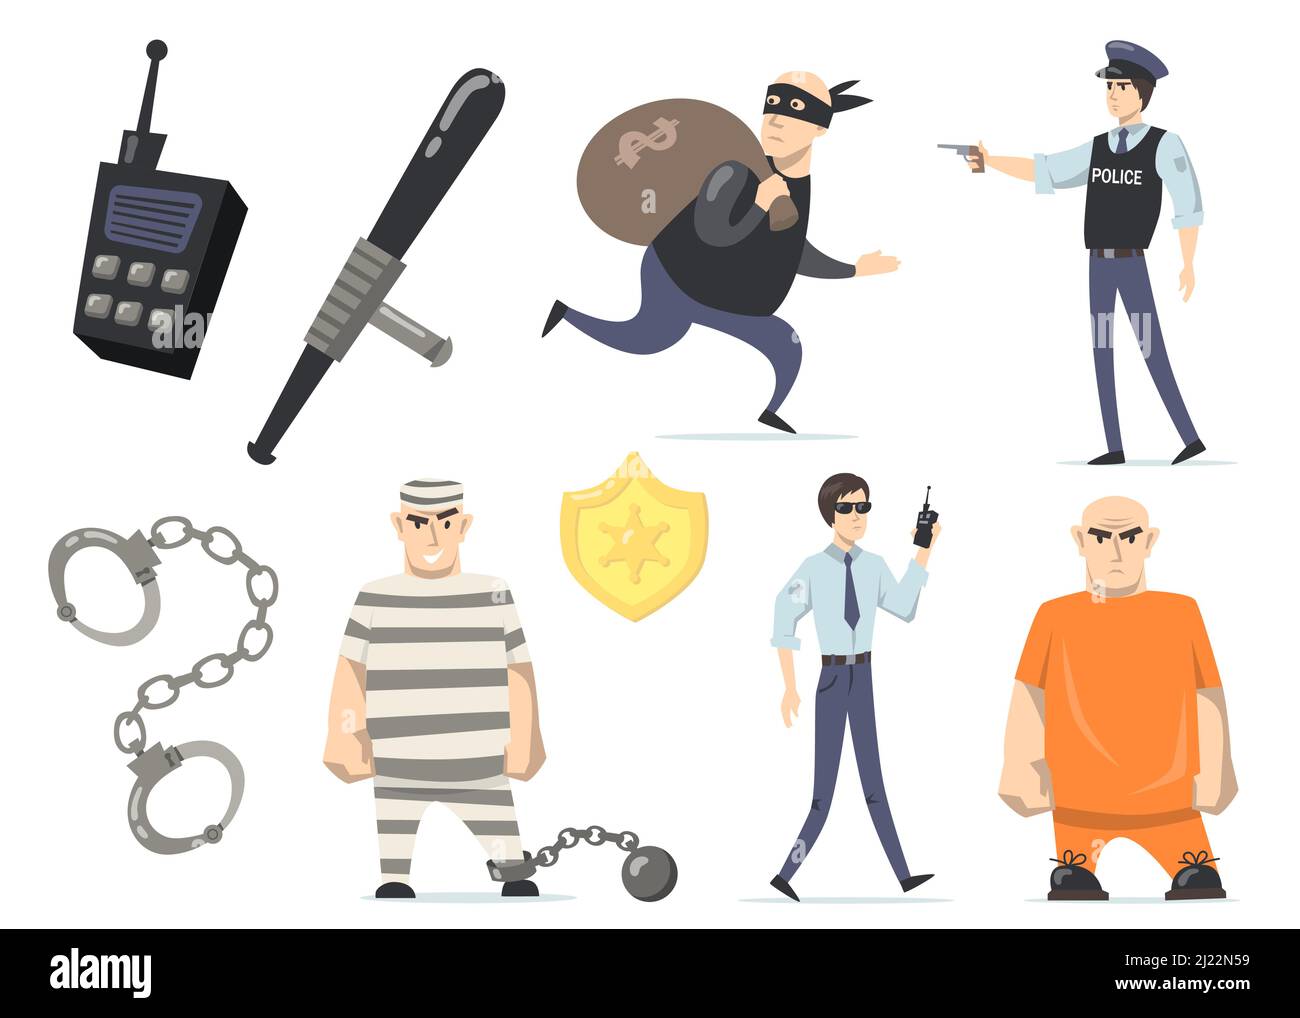 Criminals and police officers set. Burglar with money, prisoners in orange or striped uniforms, jail security, policeman with gun. Isolated vector ill Stock Vector